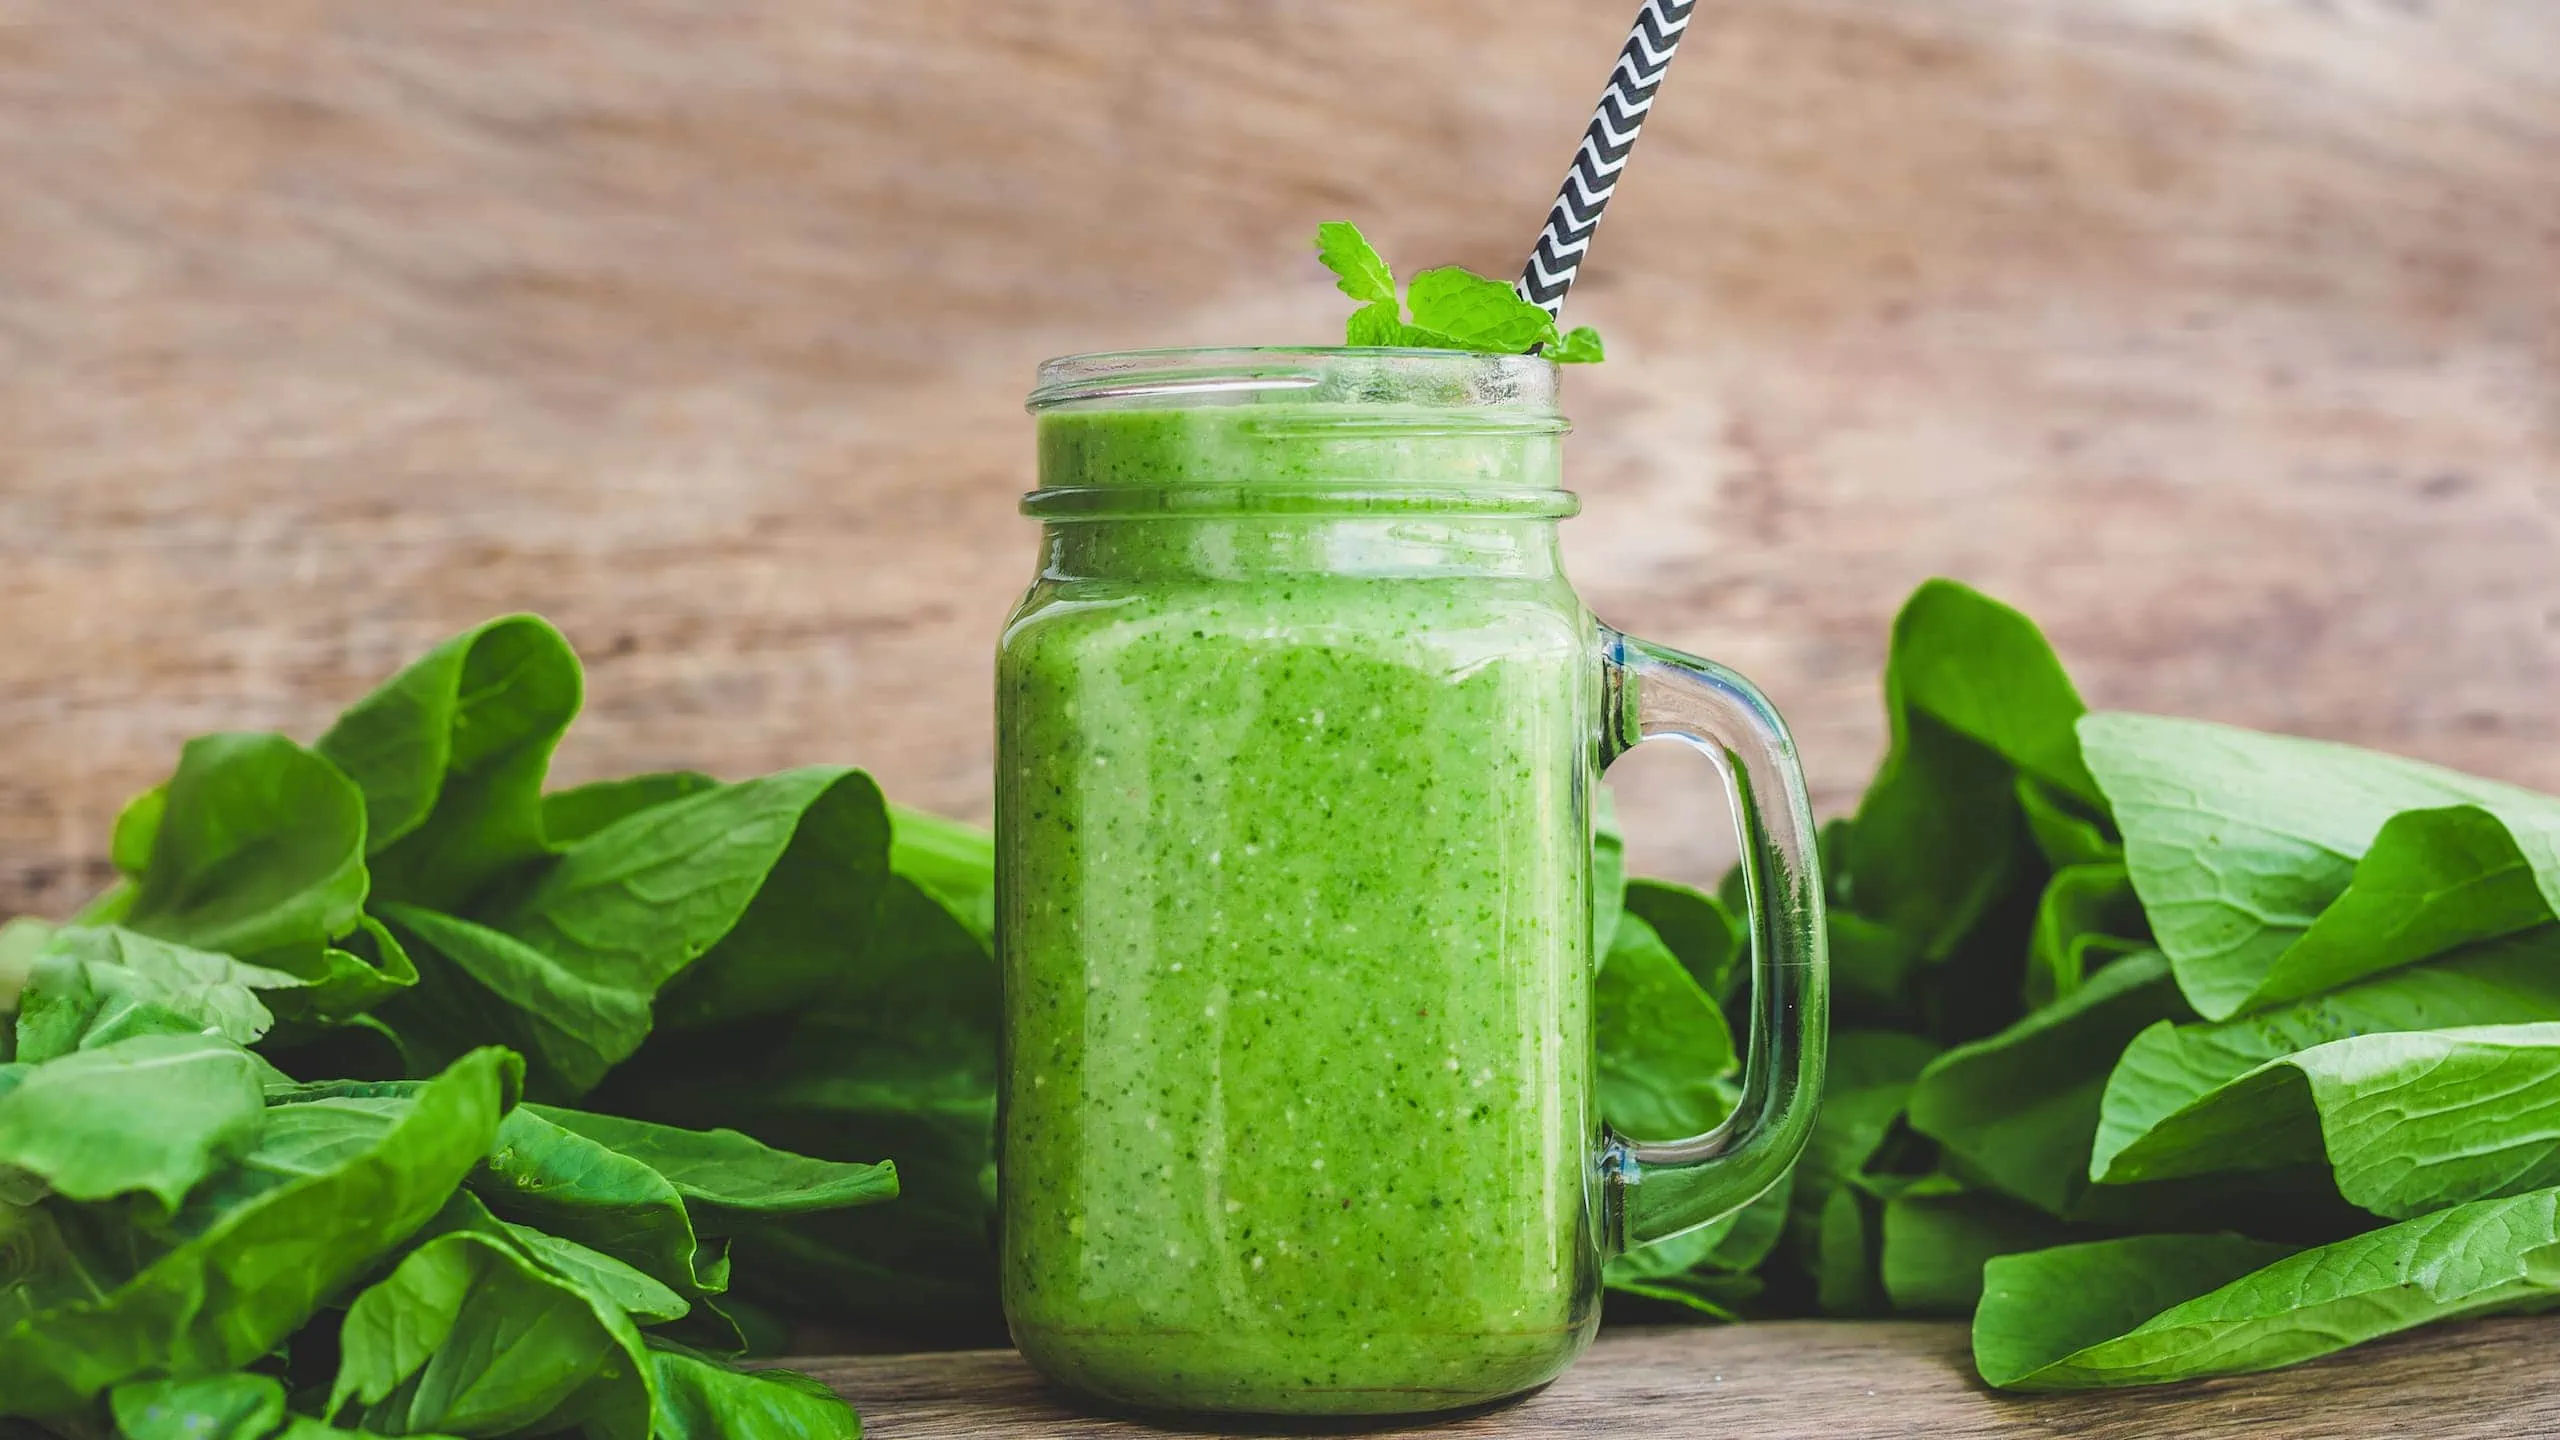 Our ultimate meal replacement smoothie recipe filled with spinach, banana, and coconut milk